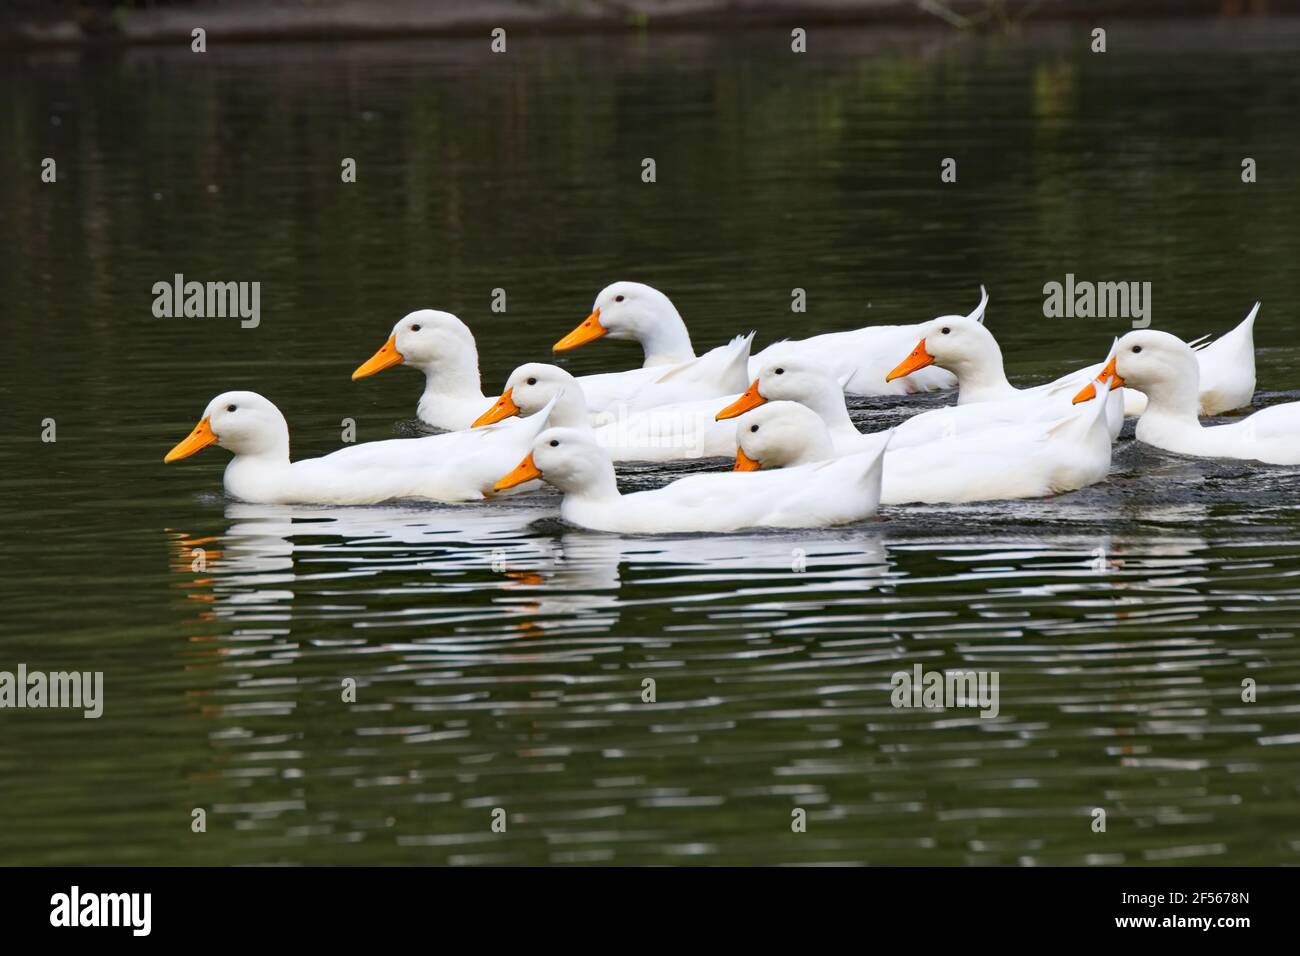 Horizontal view of a small flock of German Pekin ducks doing a synchronized water dance on the Pecotonica River in Freeport Illinois Stock Photo